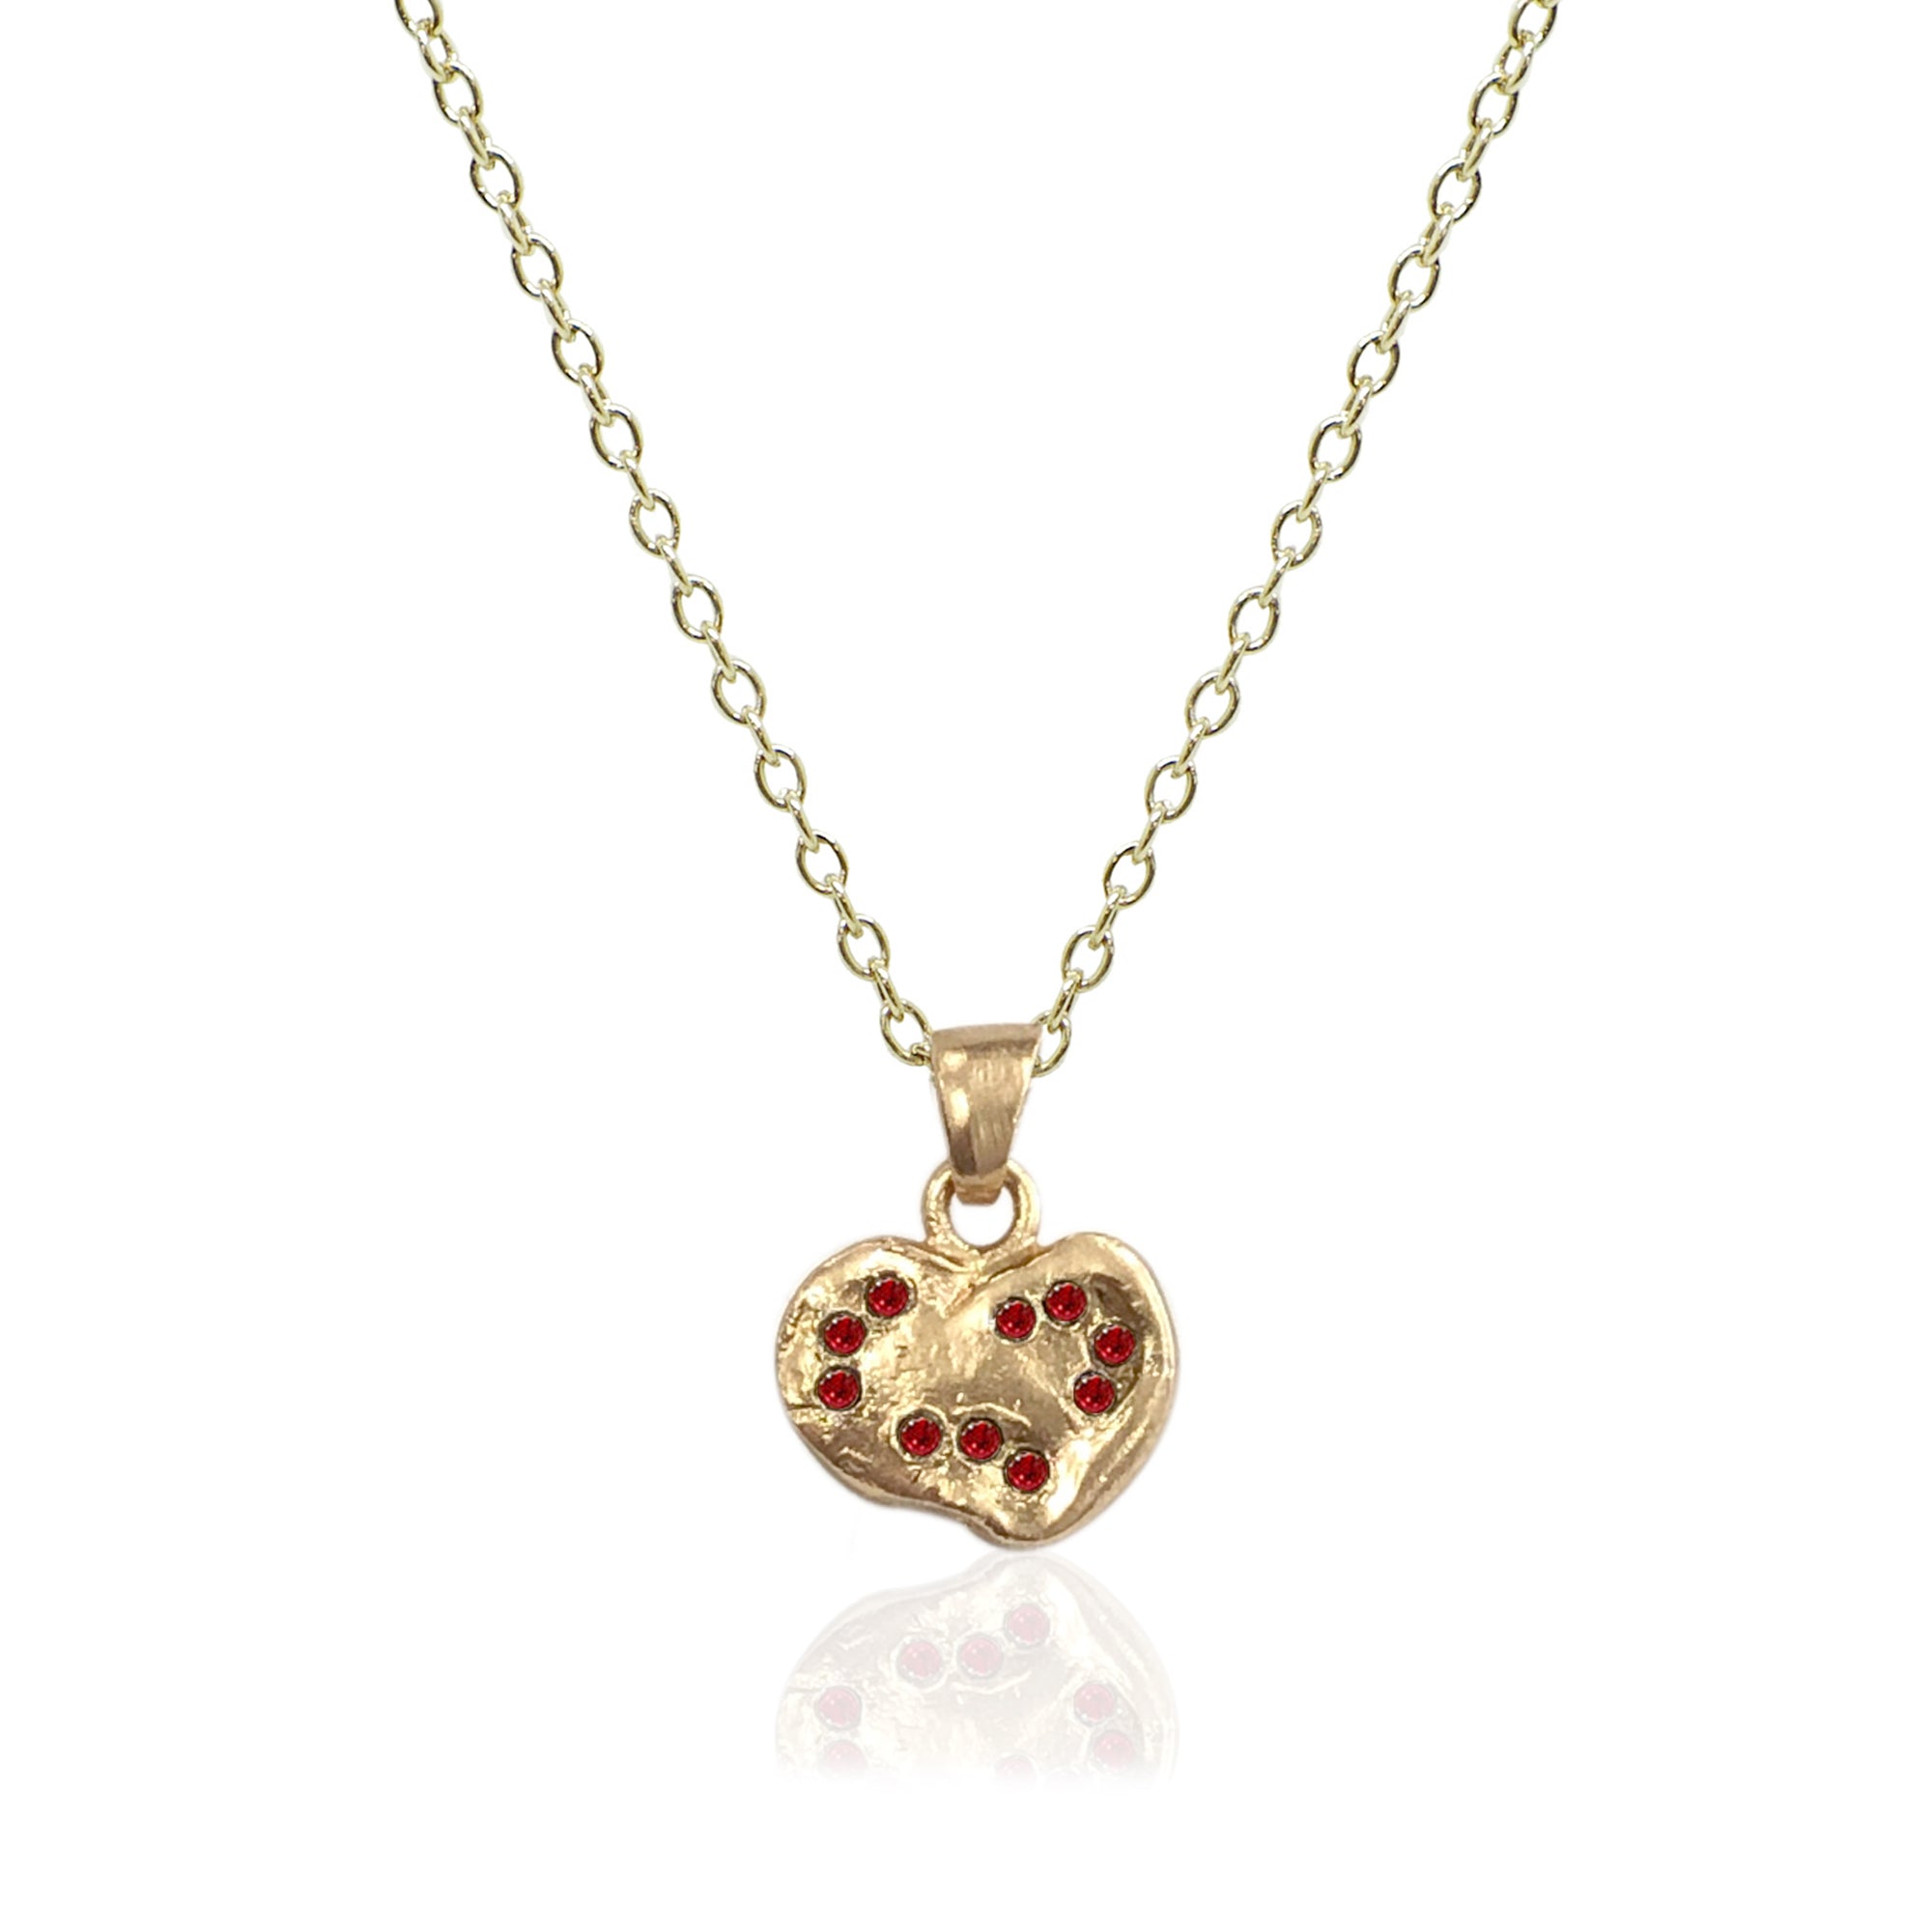 SMALL GOLD & RUBY CRYSTAL IMPRESSION HEART NECKLACE